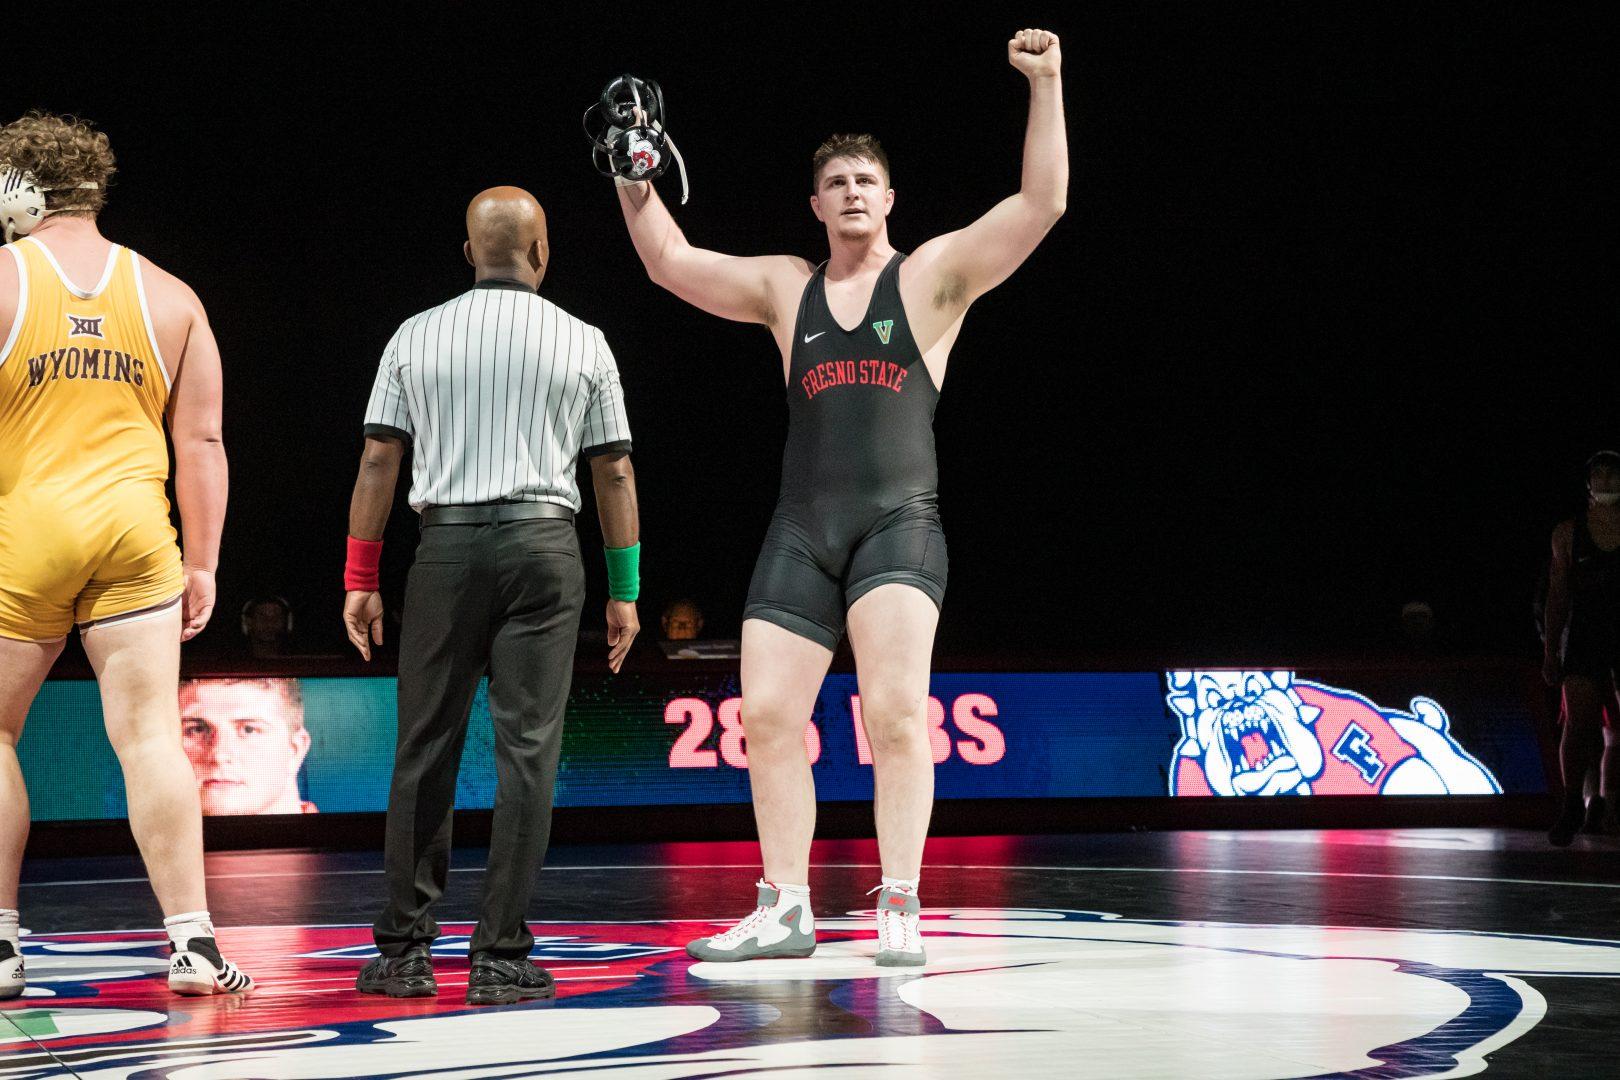 Fresno+State+wrestler+AJ+Nevills+celebrates+a+victory+in+his+match+in+a+dual+at+home+against+No.+11+ranked+Wyoming%2C+Feb.+3%2C+2019.+%28Keith+Kountz%2FFresno+State+Athletics%29